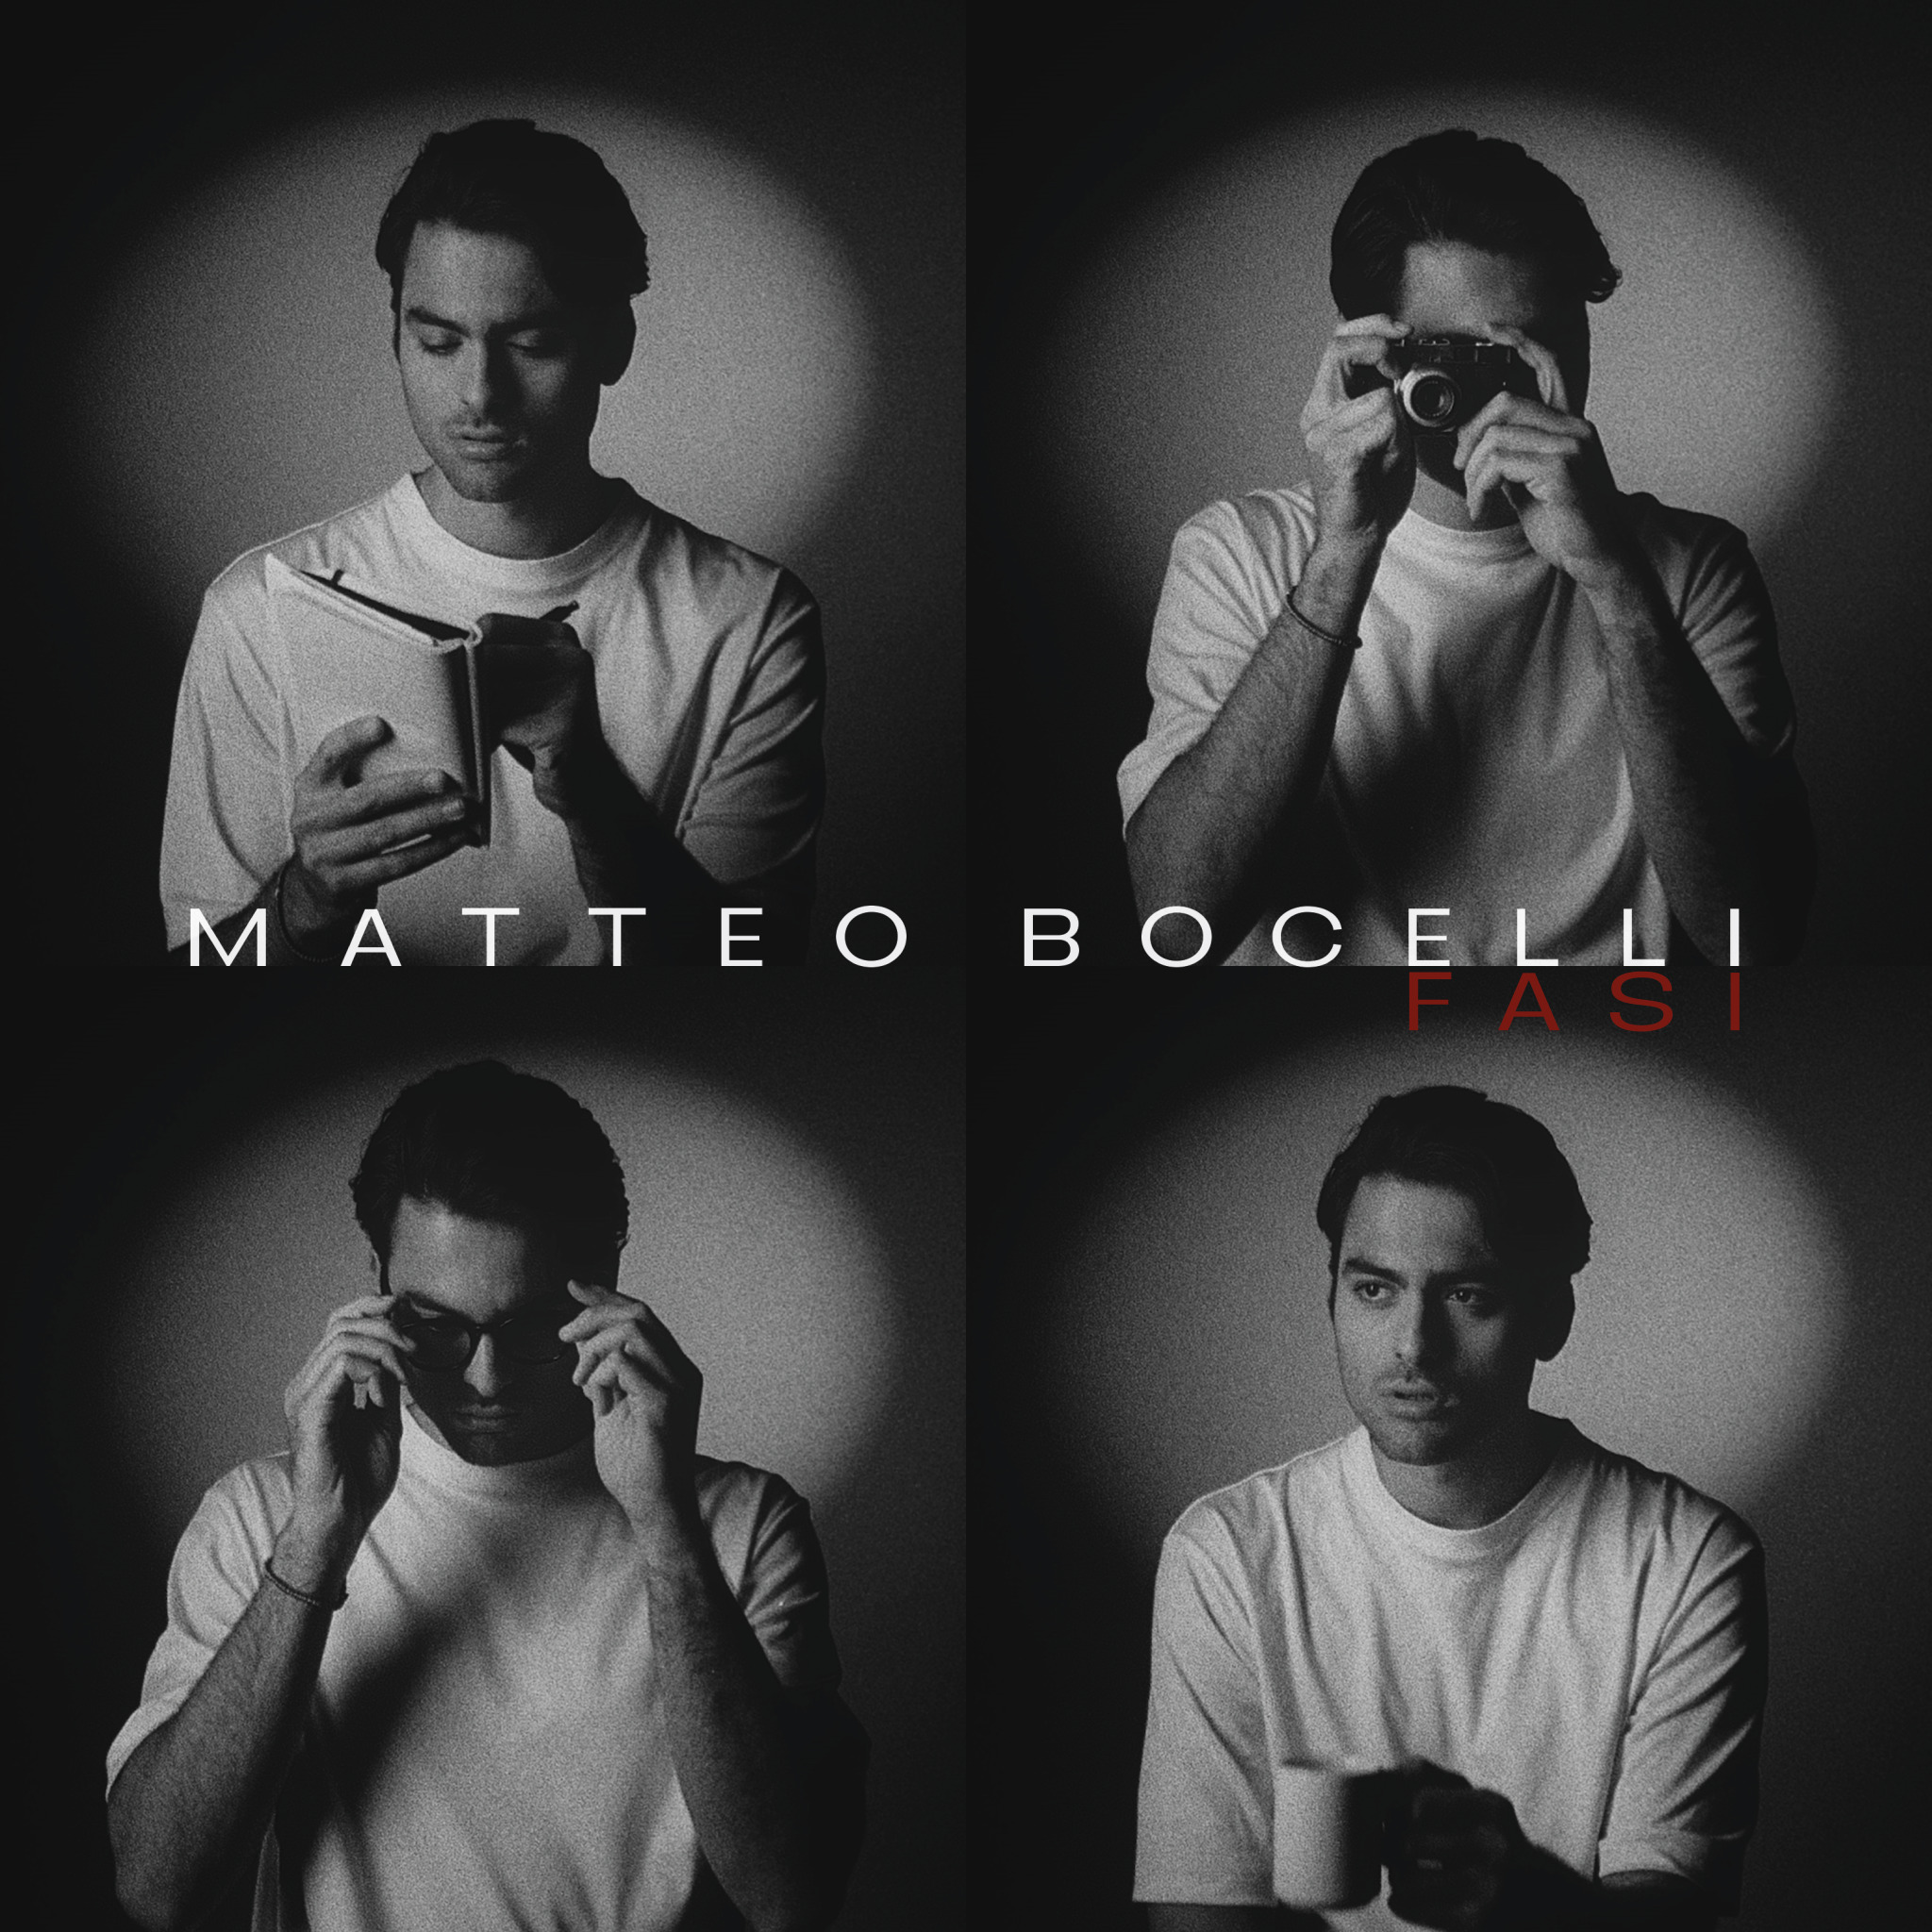 MATTEO BOCELLI RELEASES EMOTIONAL NEW SINGLE “FASI” – OUT TODAY